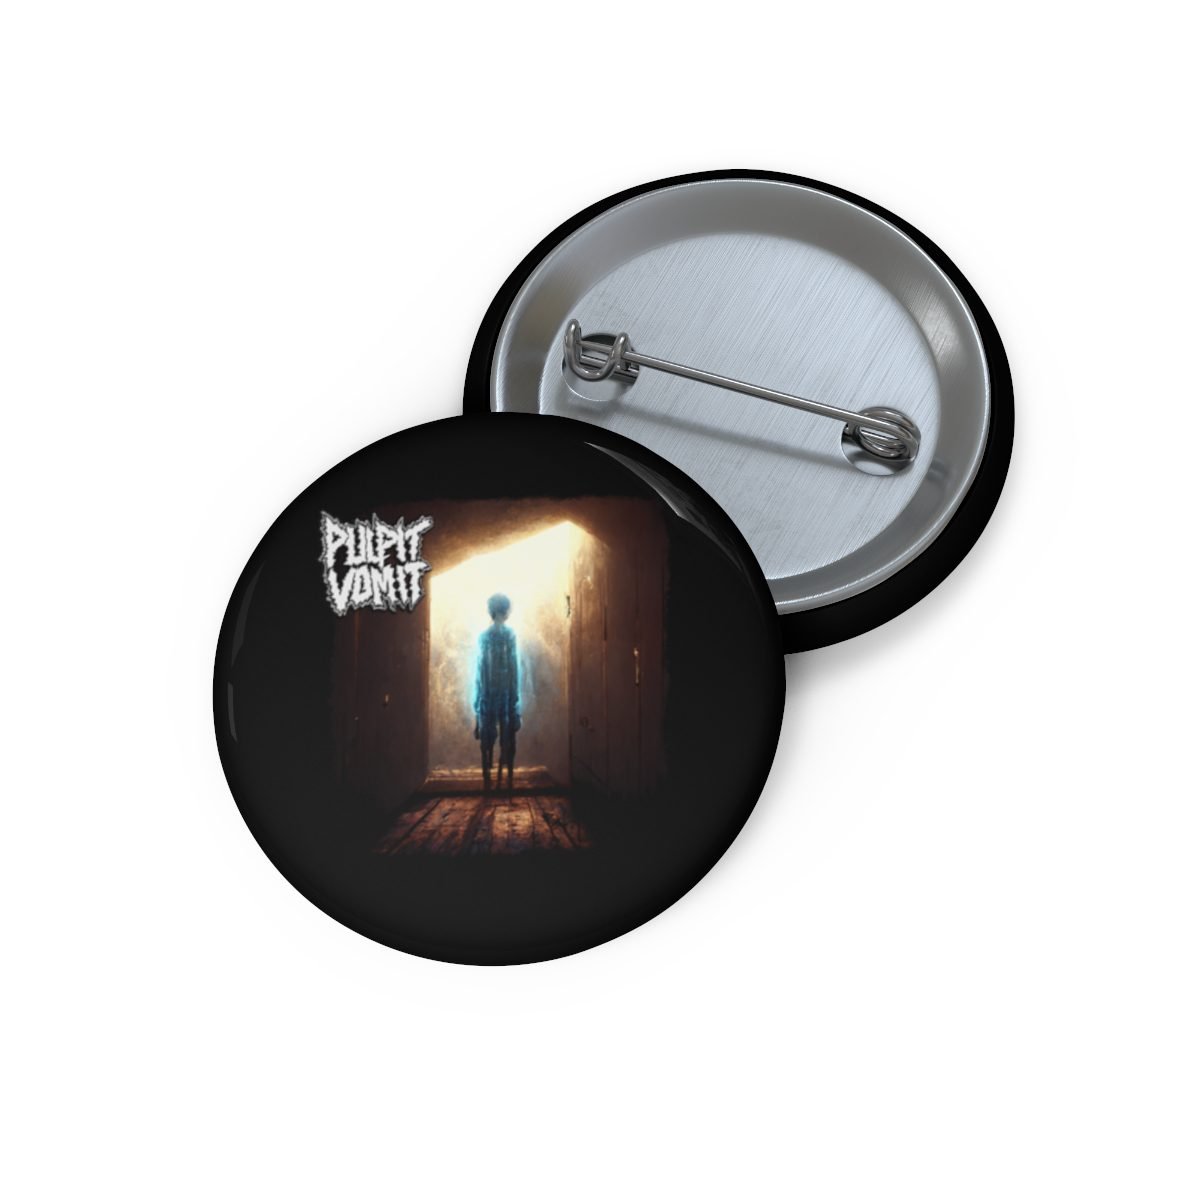 Pulpit Vomit – Ghost In The Bedroom (The Charon Collective) Pin Buttons